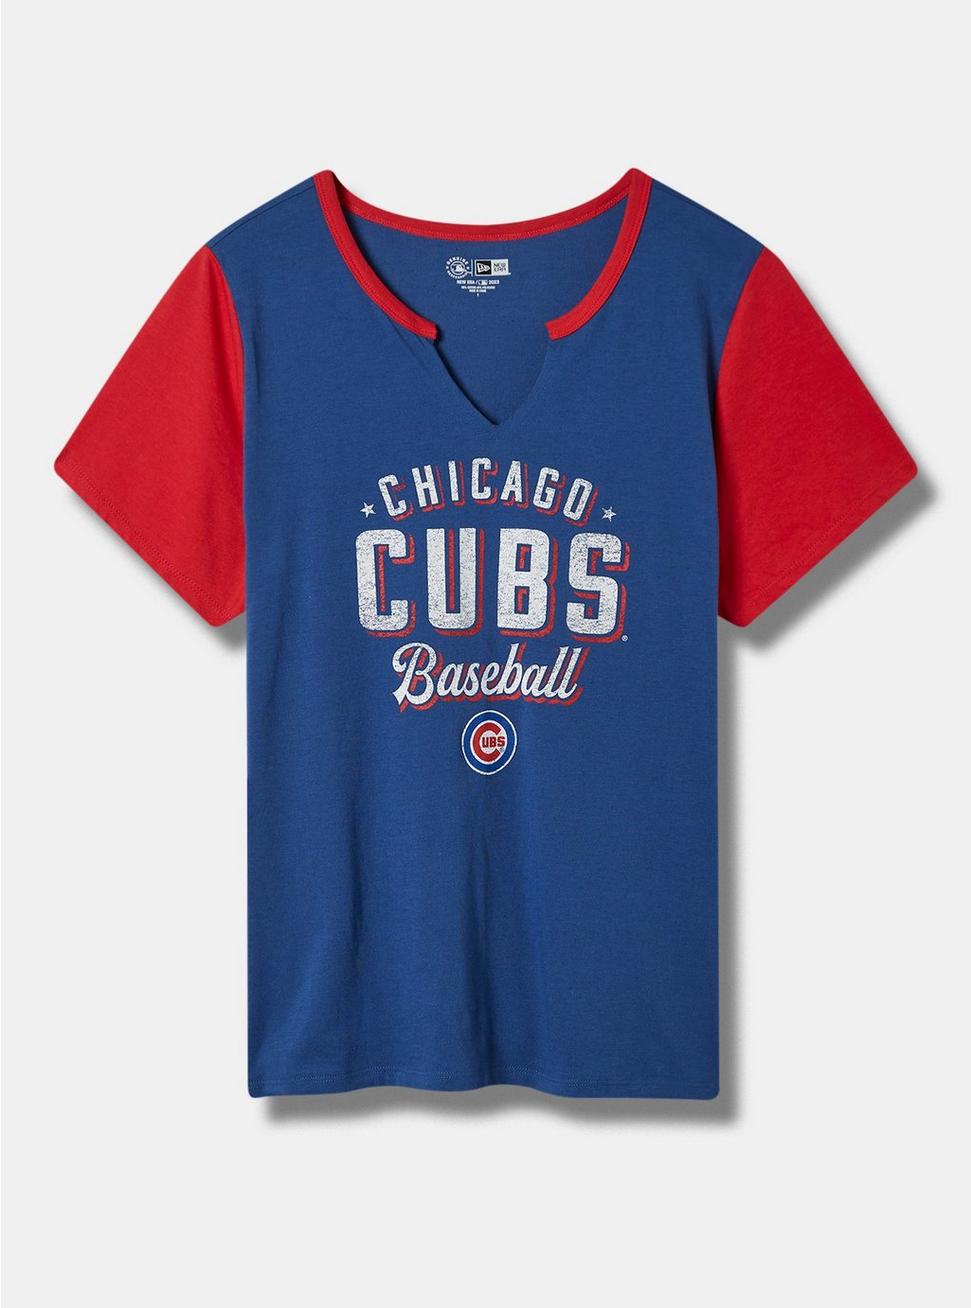 MLB Chicago Cubs Classic Fit Cotton Notch Tee, BLUE, hi-res